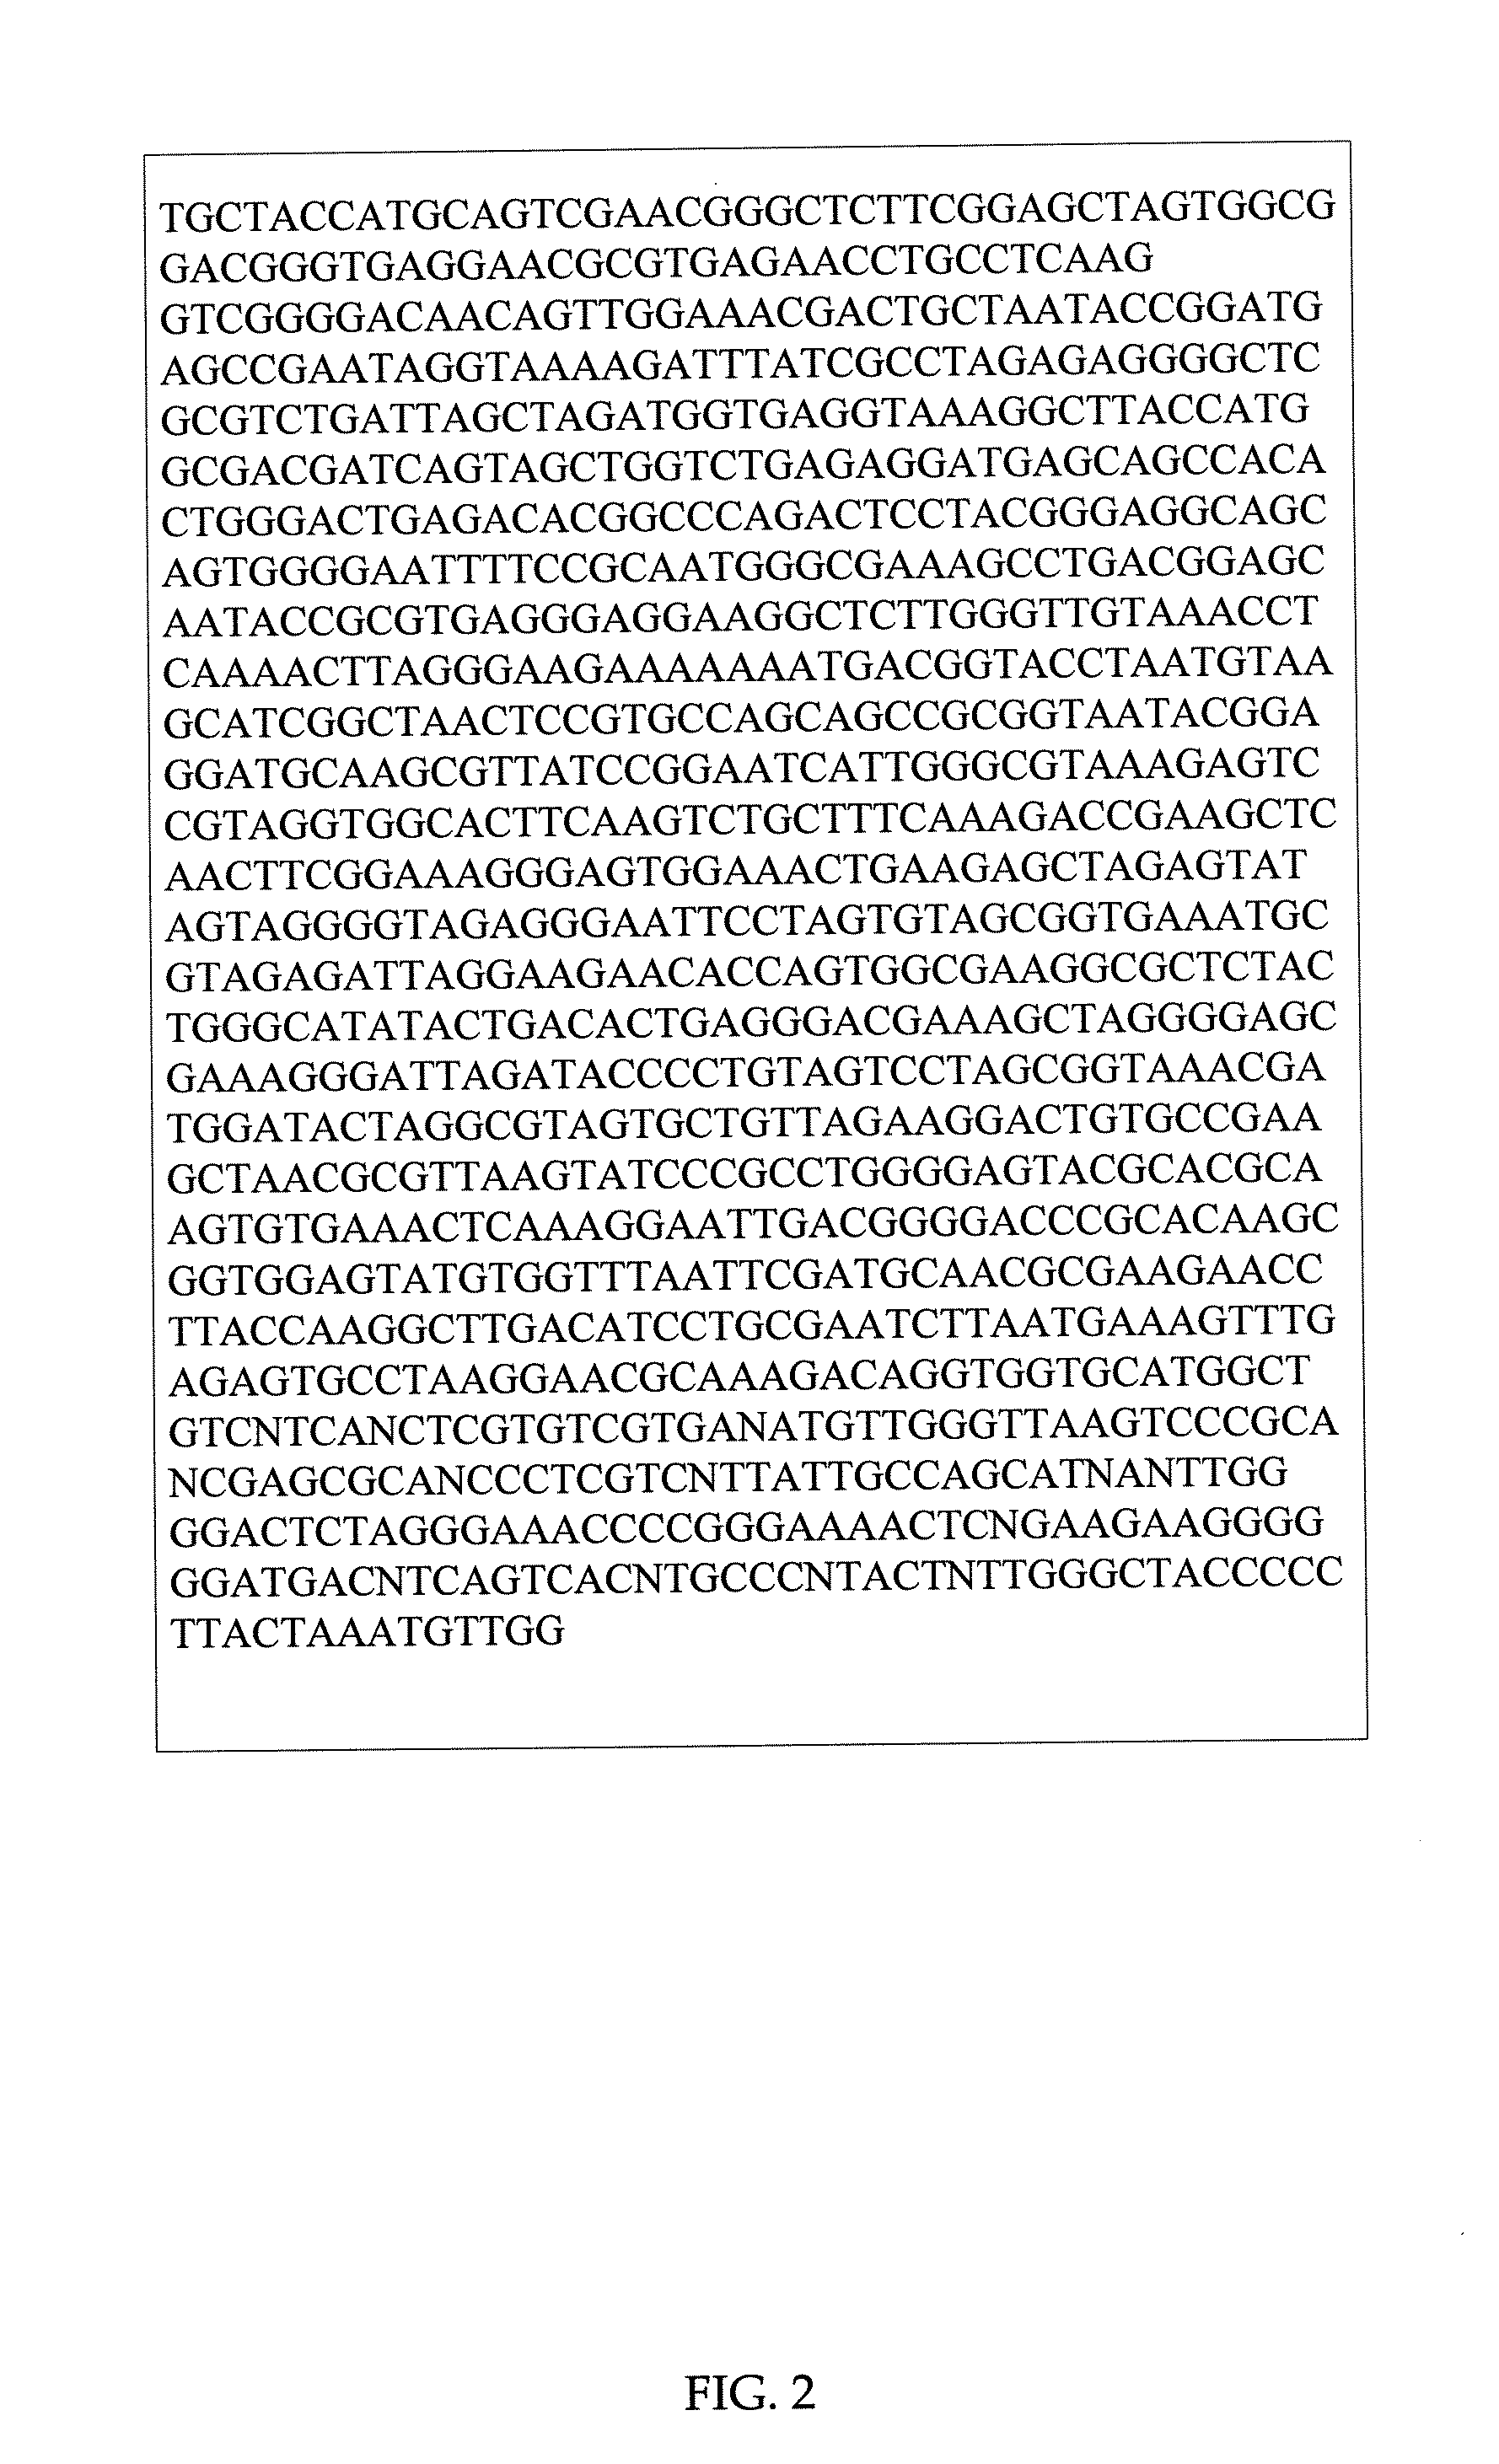 Cyanobacterial Isolates Having Auto-Flocculation and Settling Properties